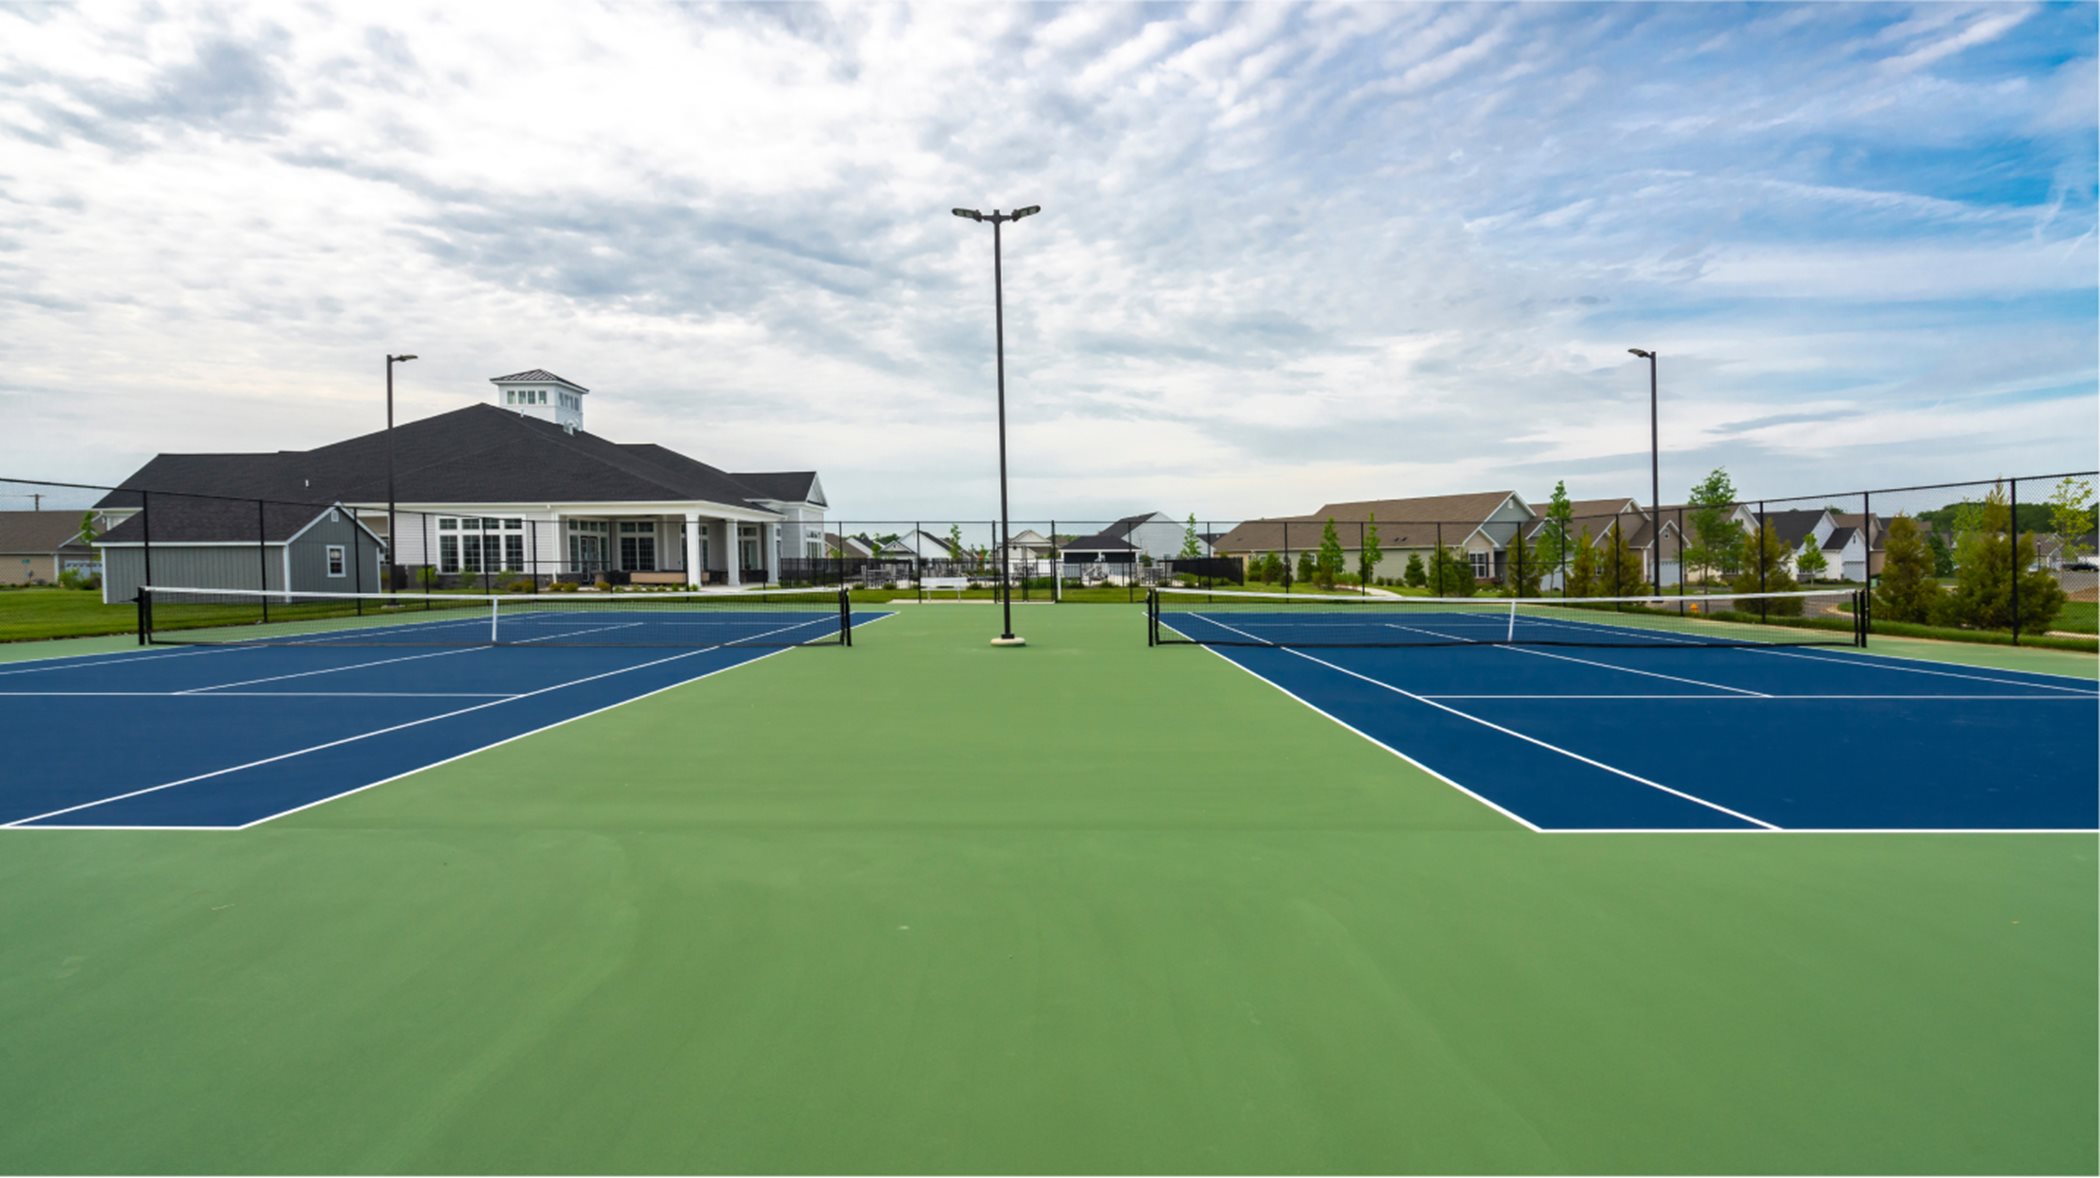 Clubhouse tennis court